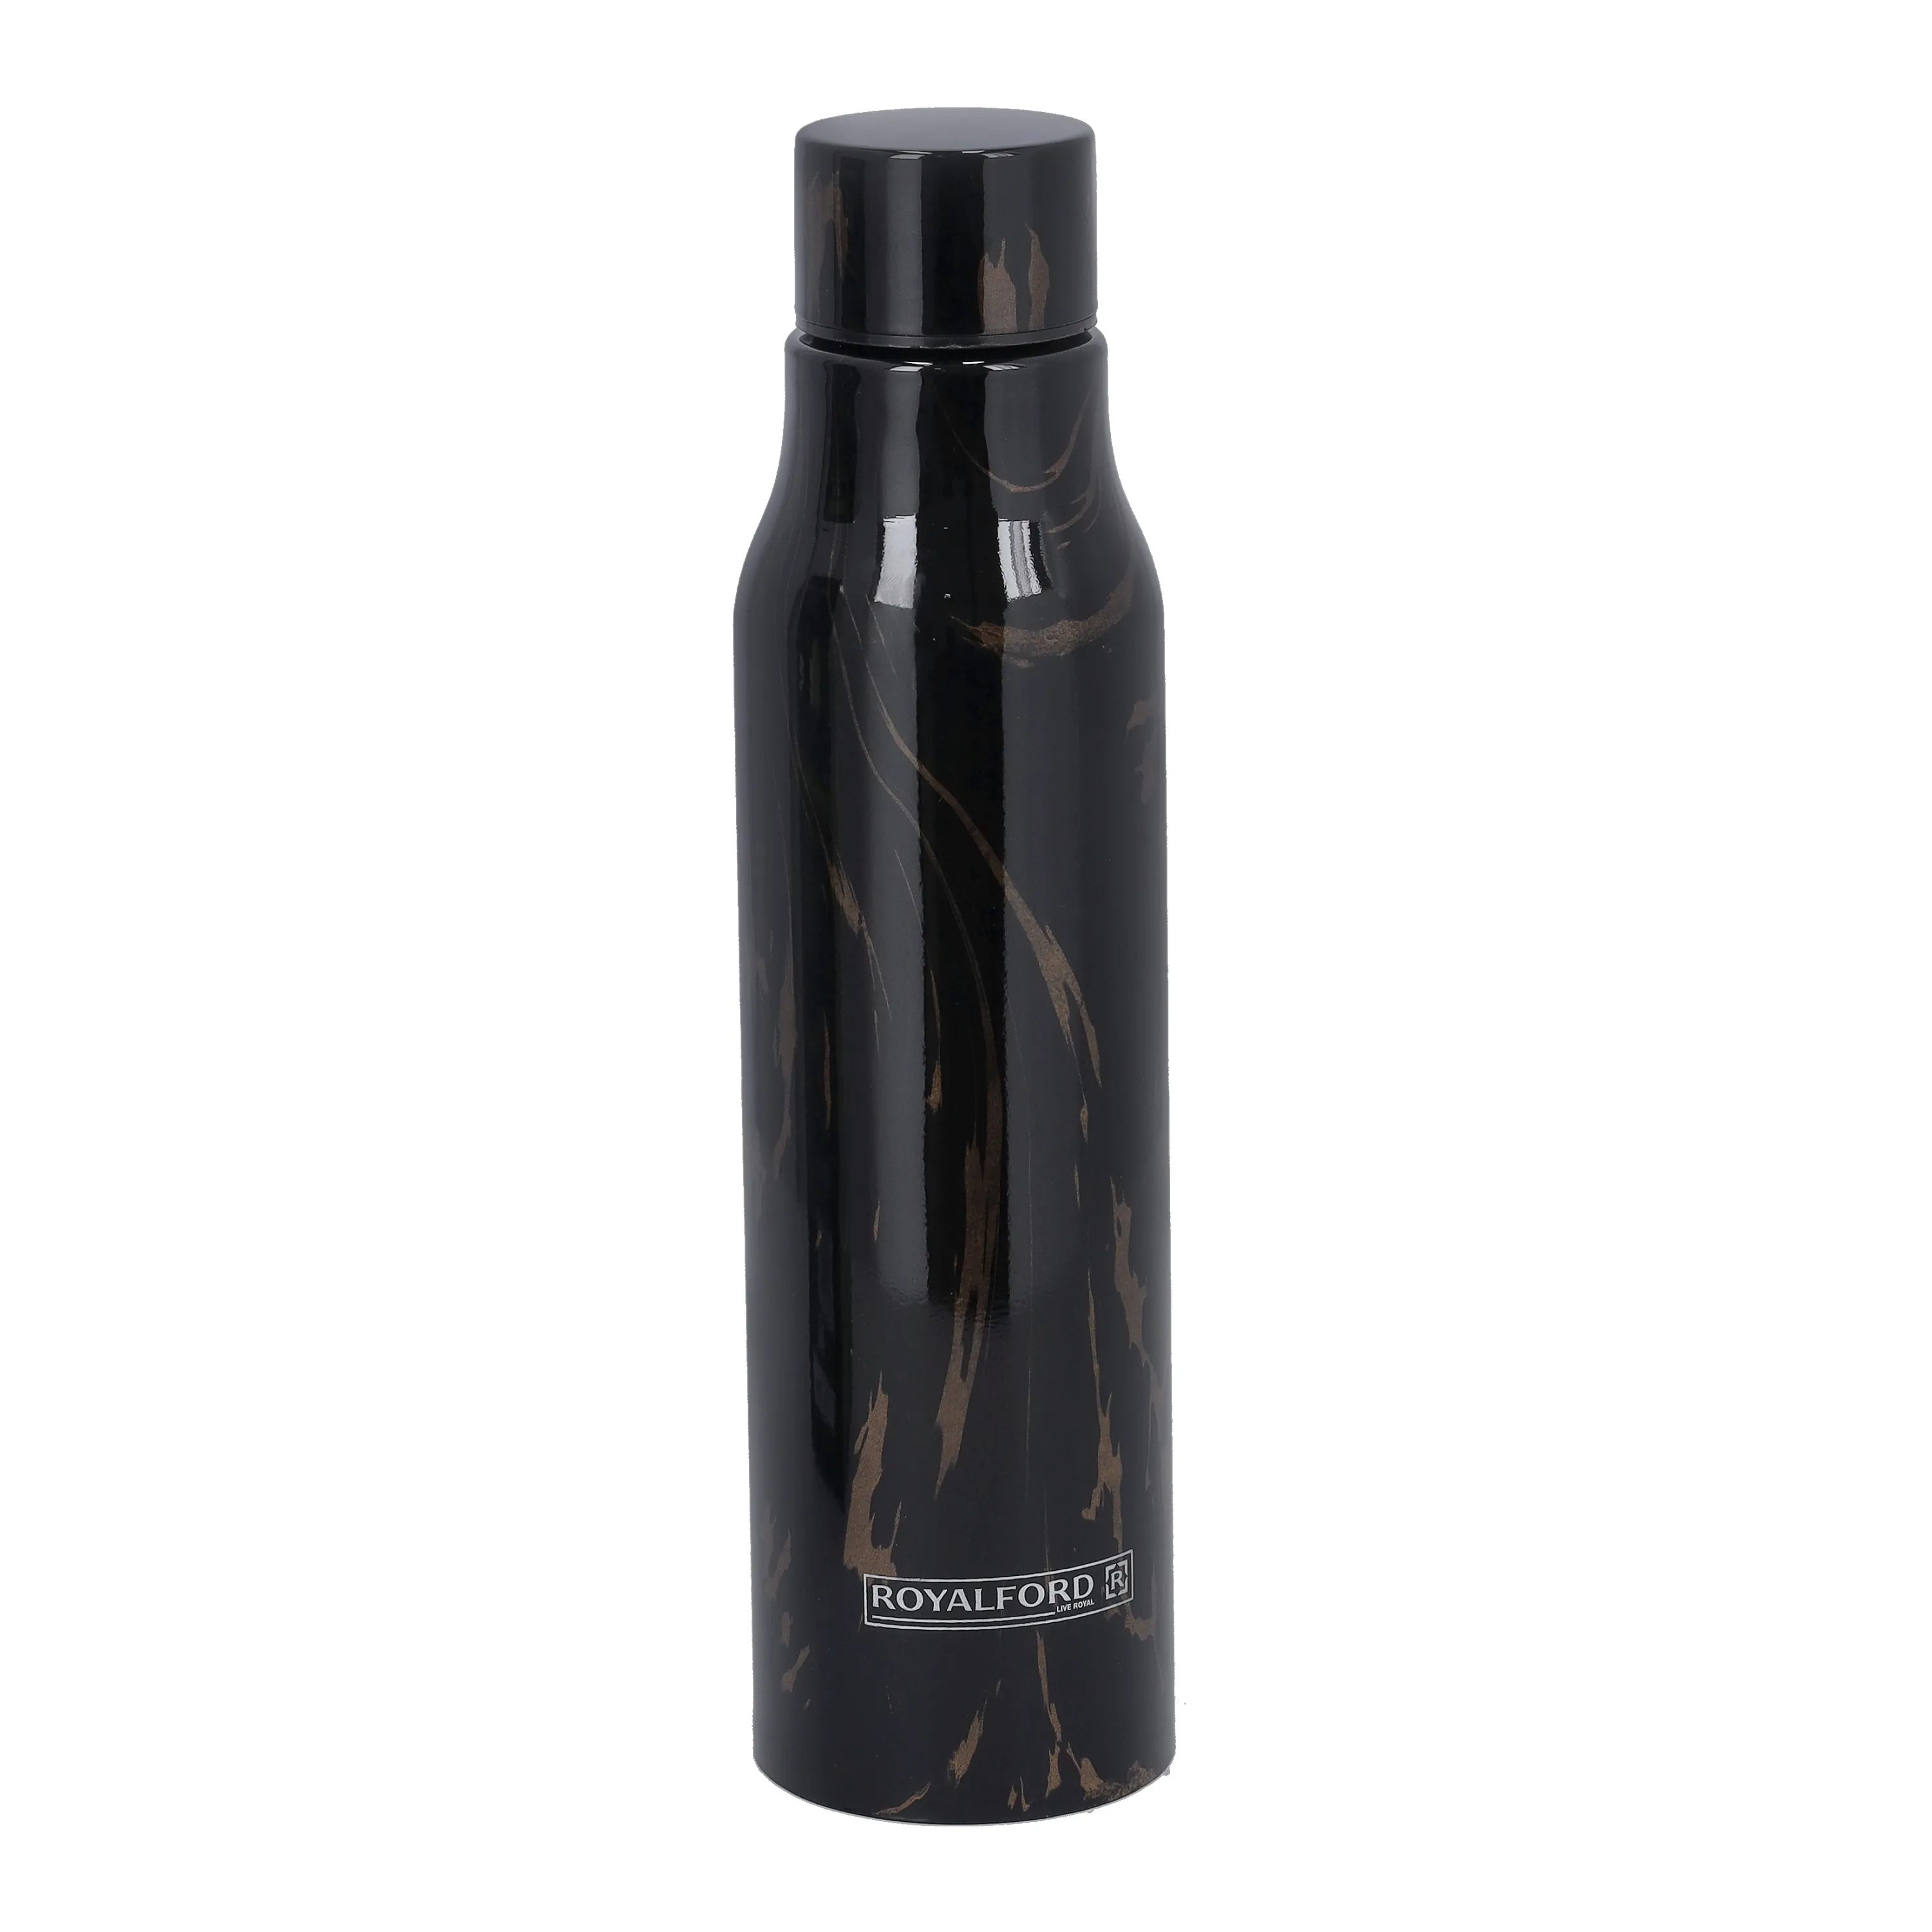 Royalford Stainless Steel Water Bottle, Silicon Sealing Ring, RF10019 Odour Free 1000ml Durable Body Ideal for Hiking, Camping, Office and School Purpose Preserve Flavour and Freshness